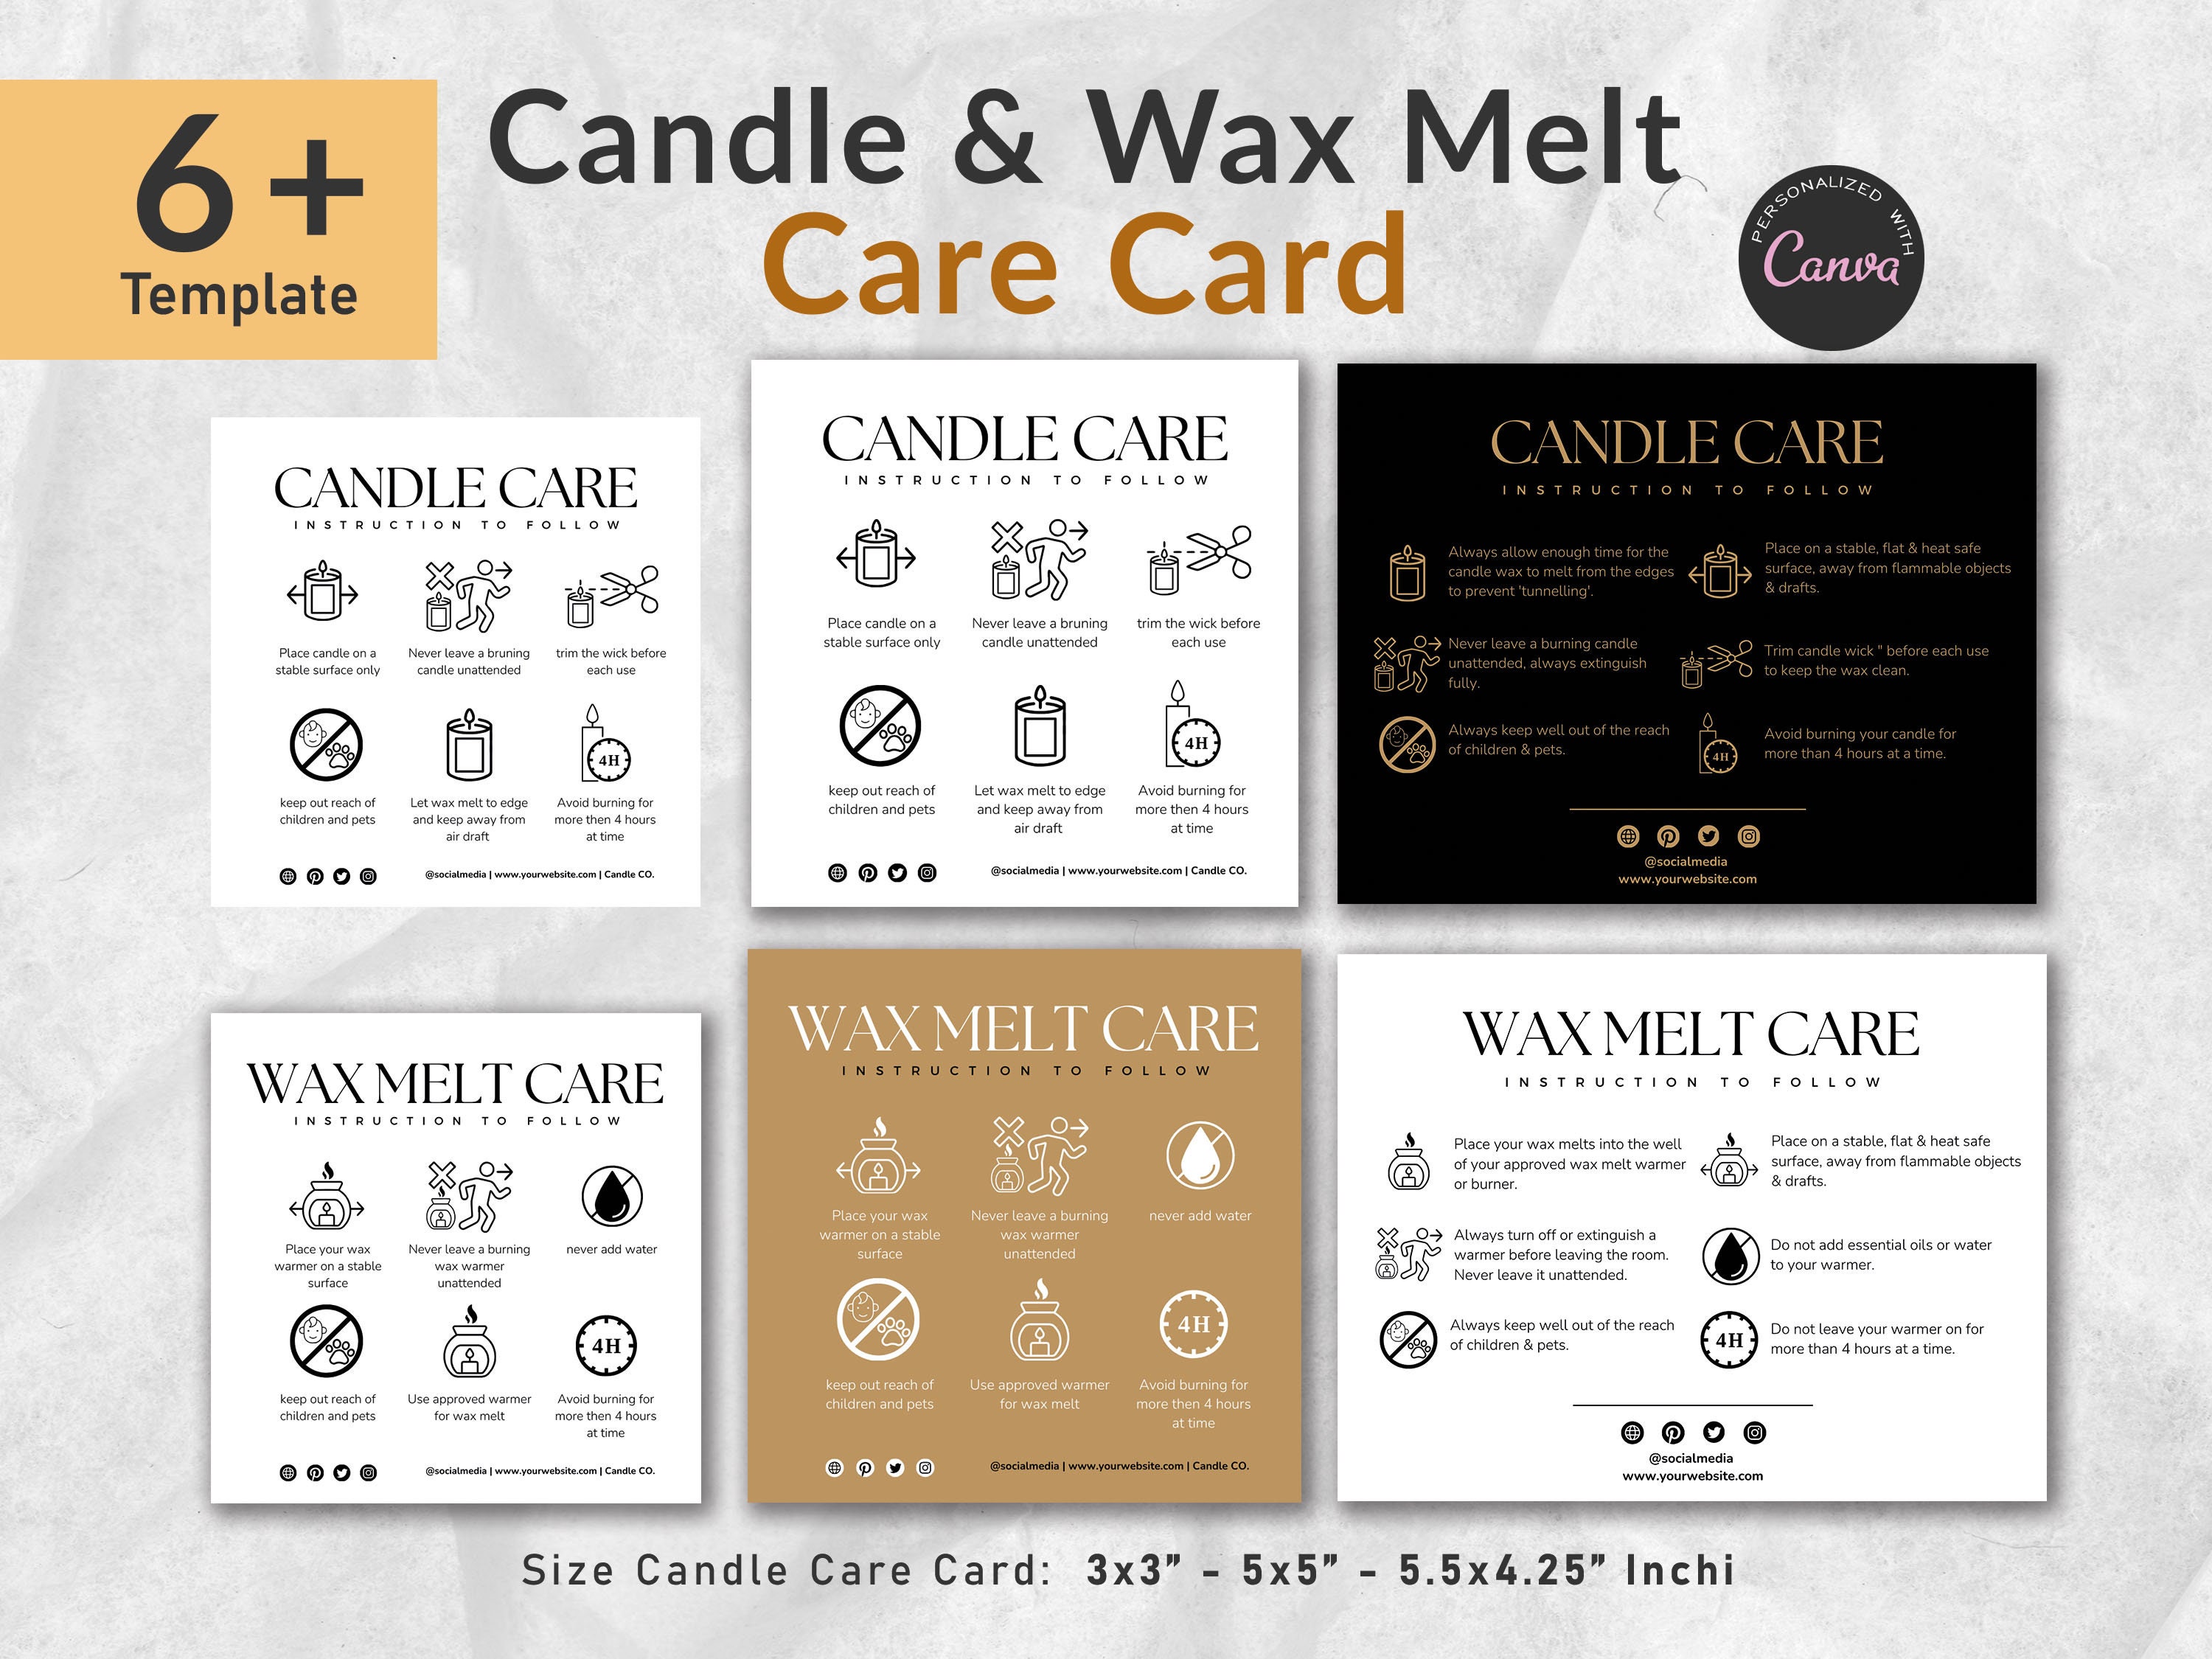 Editable Wax Melt Care Card Template, Wax Candle Care Instructions, Wax  Safety Guide Template, Wax Melt Packaging for Candle Business 